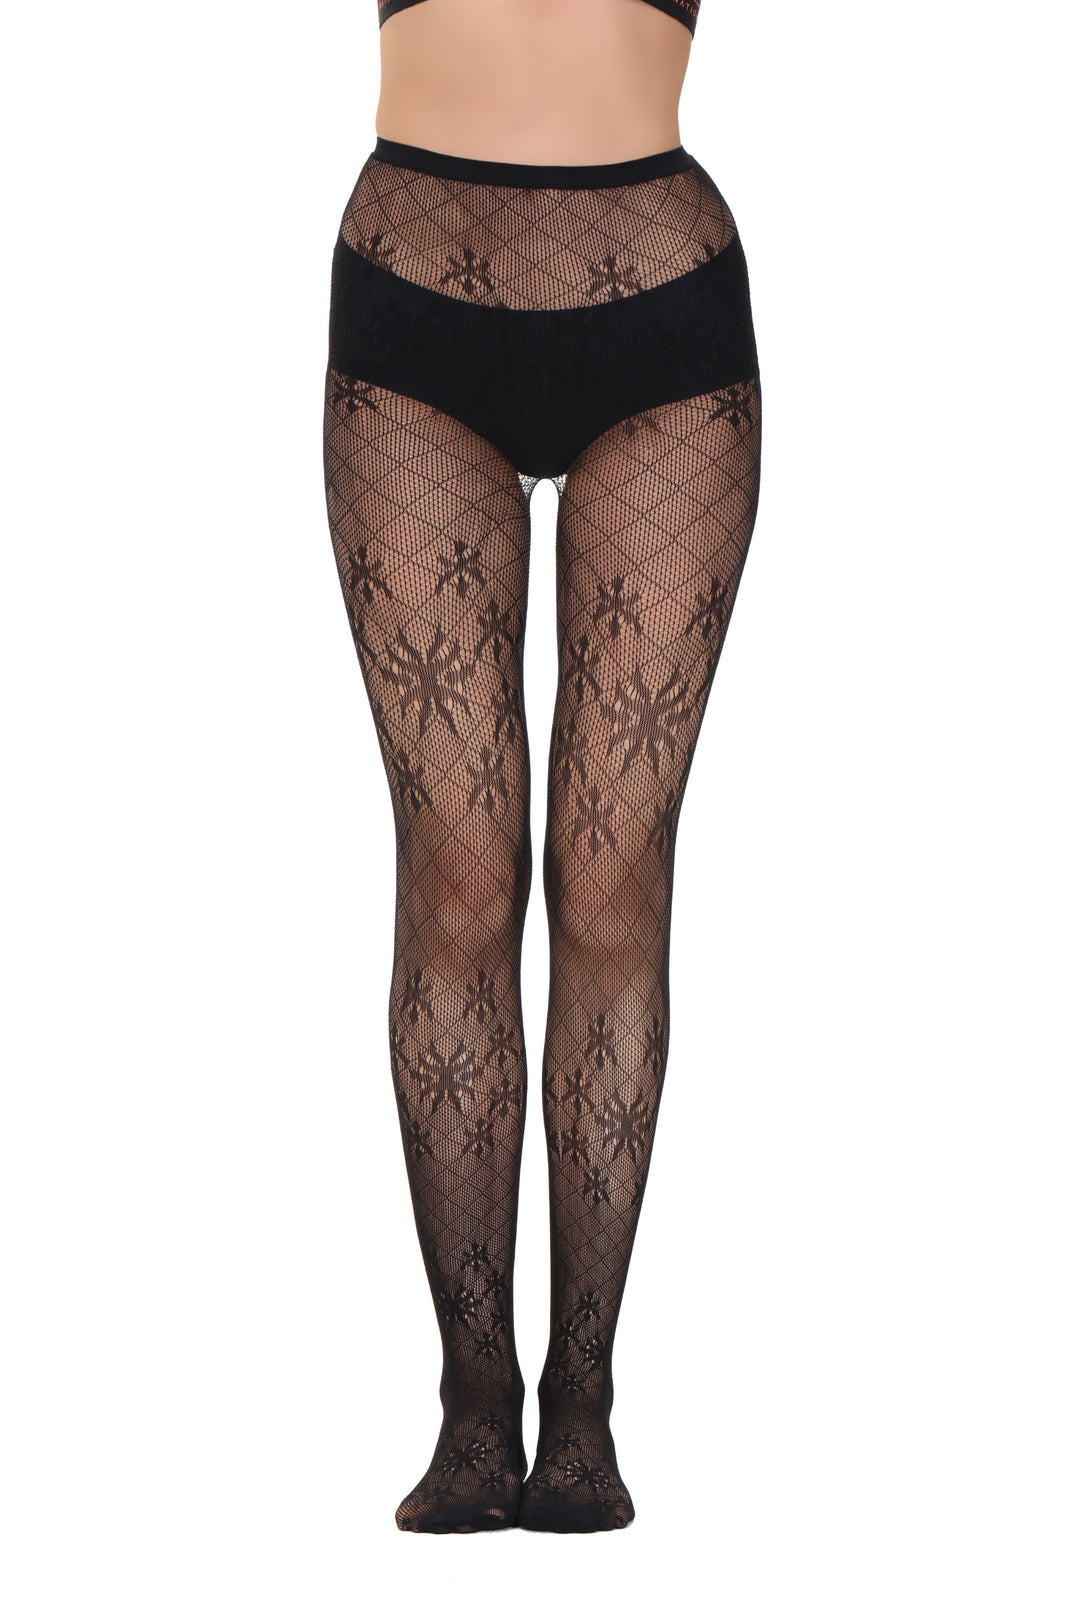 Fishnet Tights 110976 Front